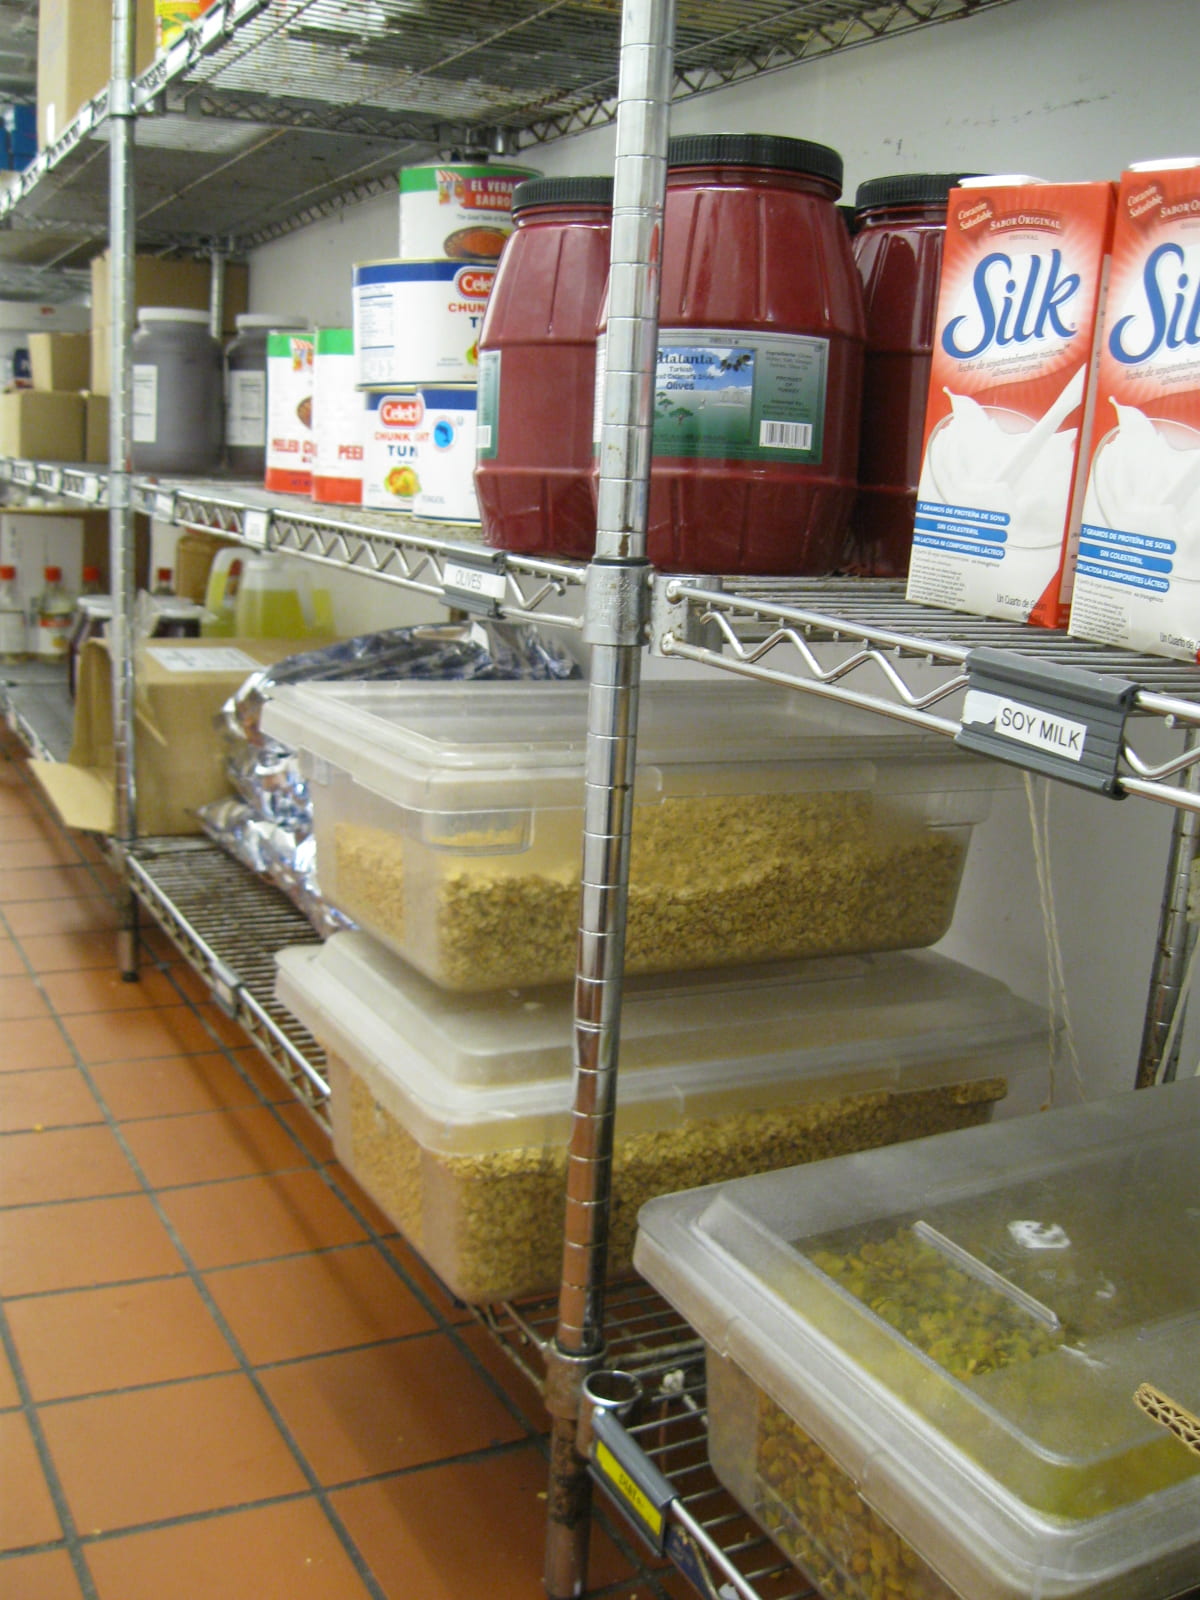 Photo shows metal storage shelves with proper spacing and pest-resistant storage of food items. Spacing the metal shelves in a way that allows cleaning and reduces pest habitat